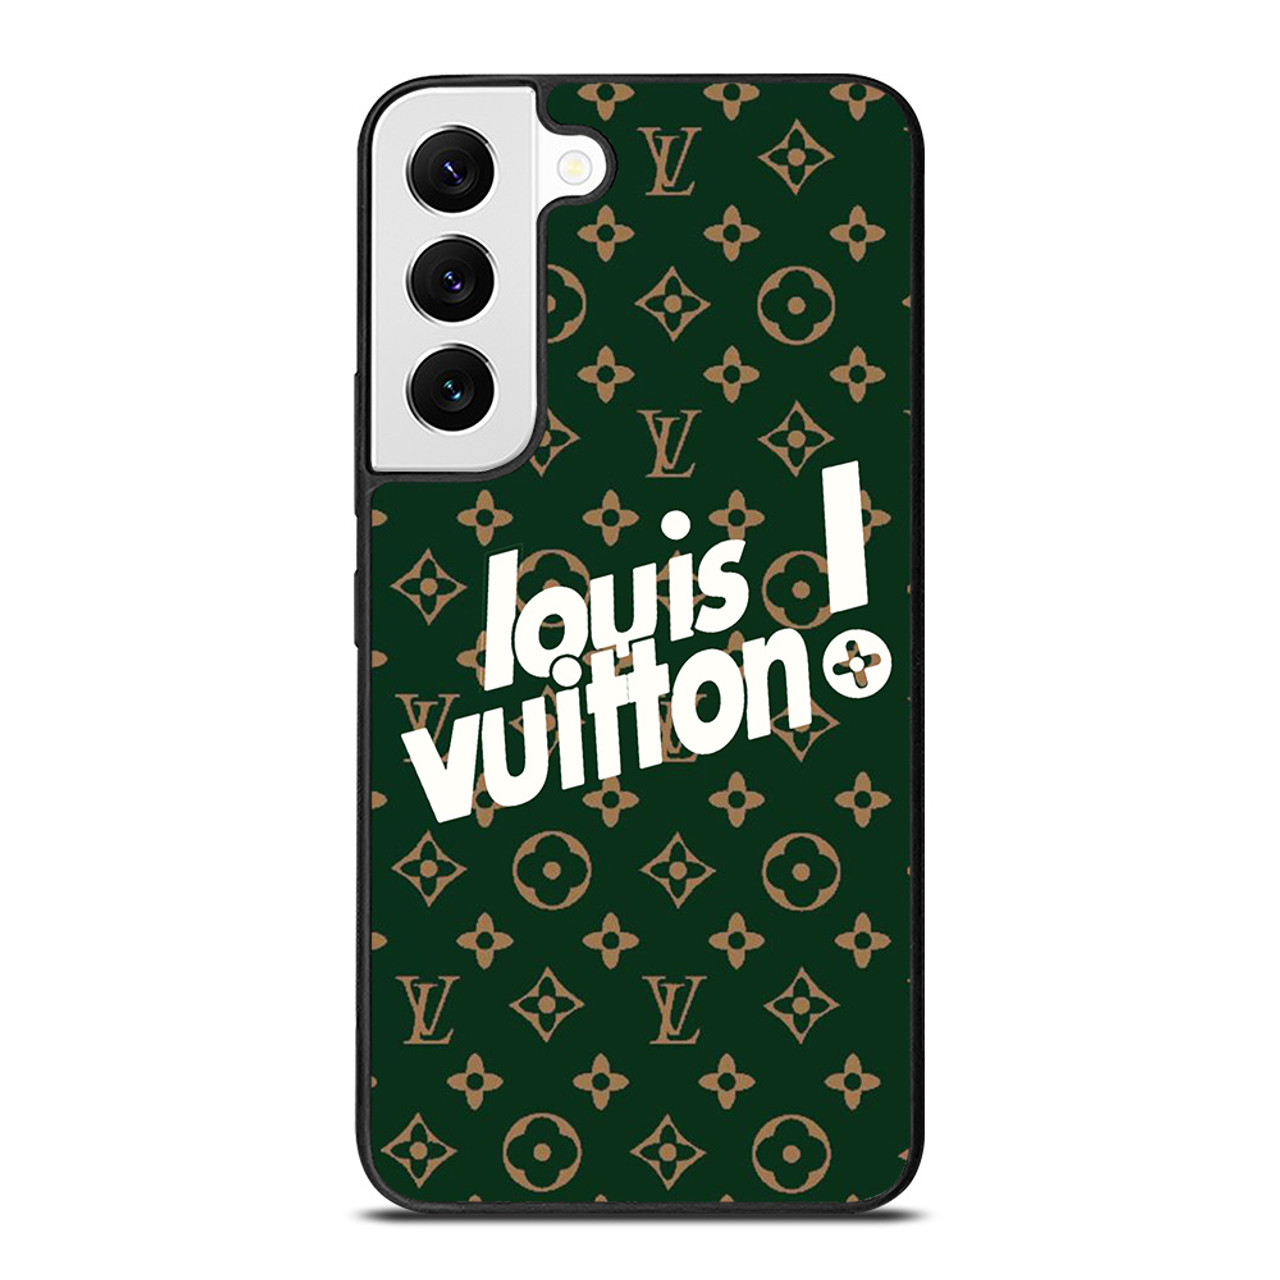 Louis Vuitton Cover Case For Samsung Galaxy S23 S22 Ultra S21 S20 Note 10  Note 20